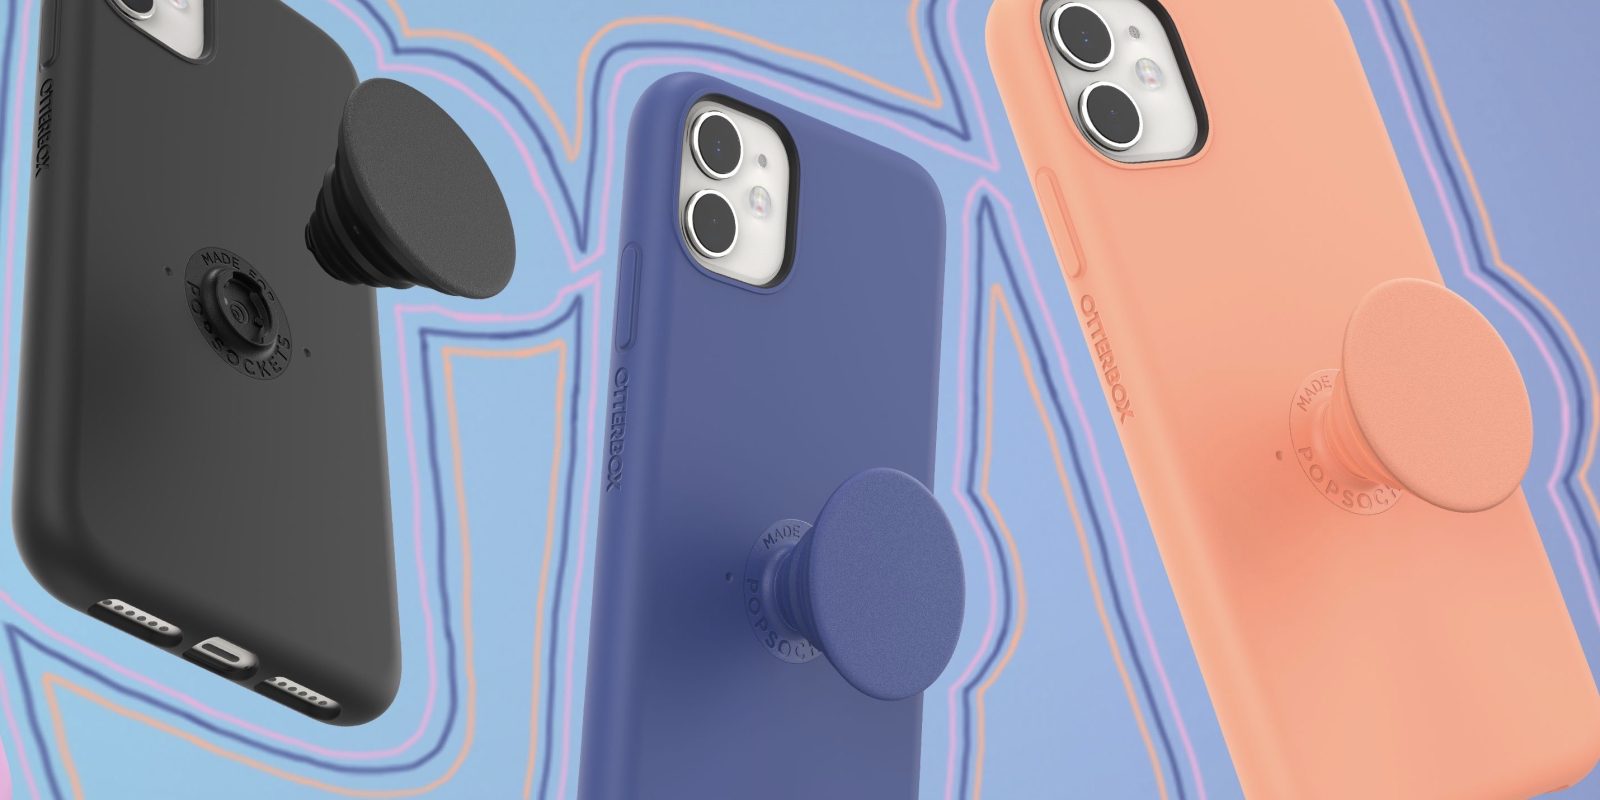 OtterBox launches colorful iPhone 11 cases with built-in at Apple 9to5Mac